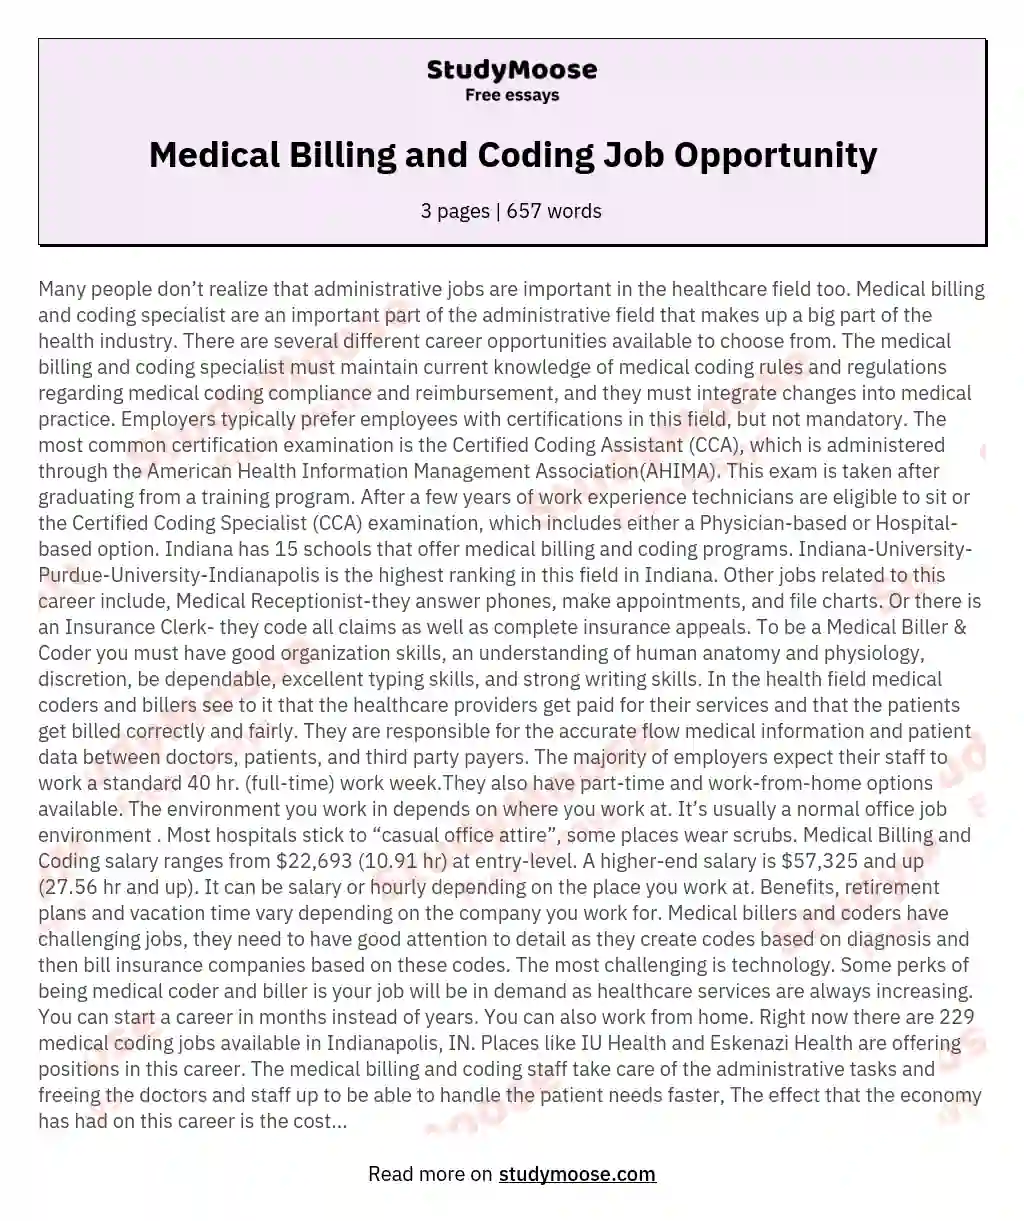 Medical Billing and Coding Job Opportunity essay